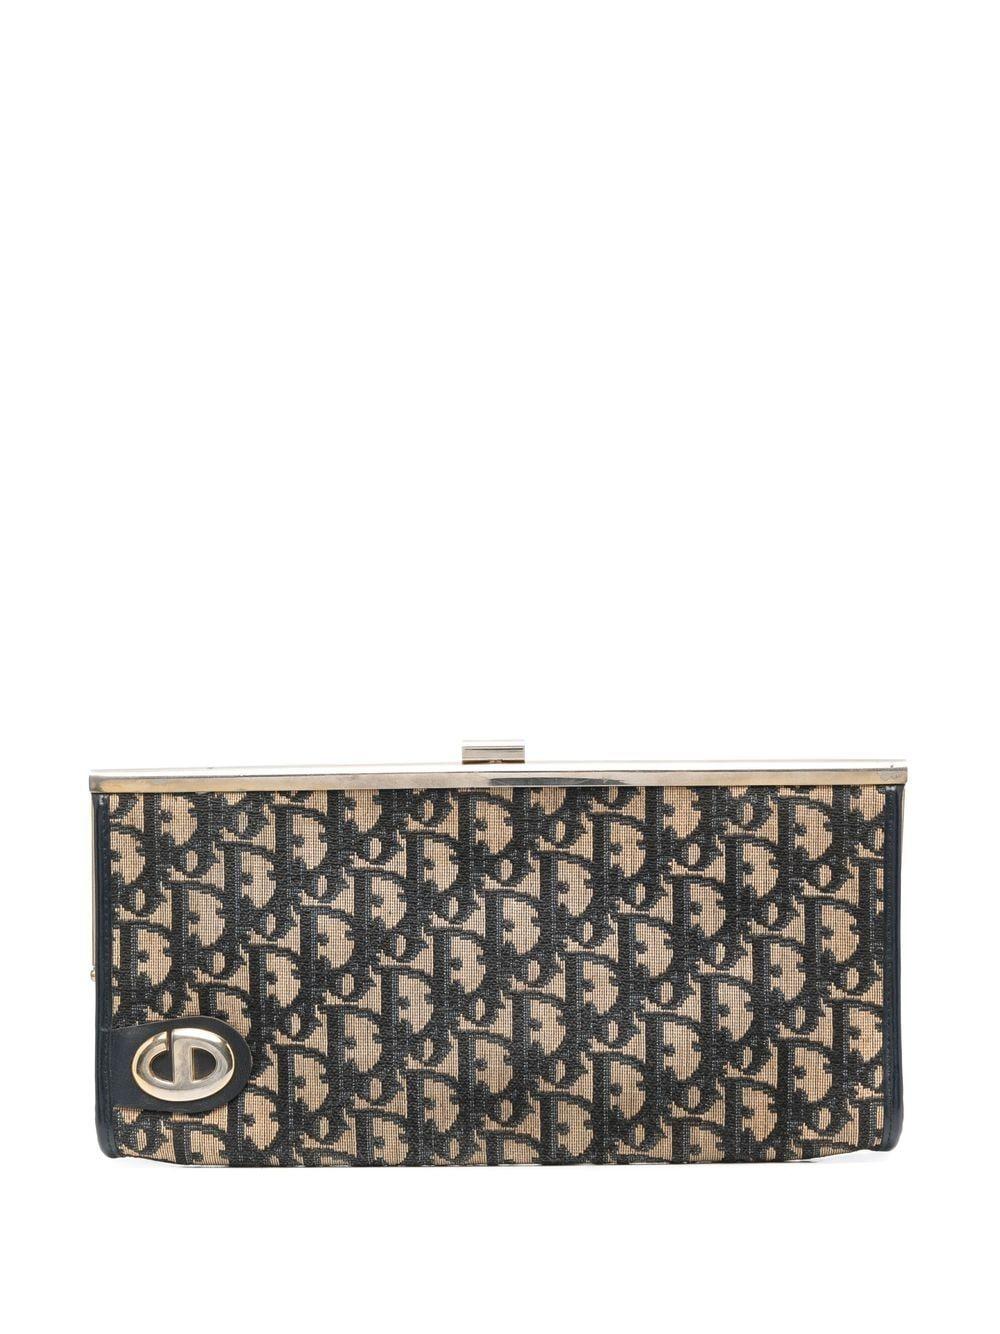 1970s Christian Dior Trotter Clutch Bag For Sale 1